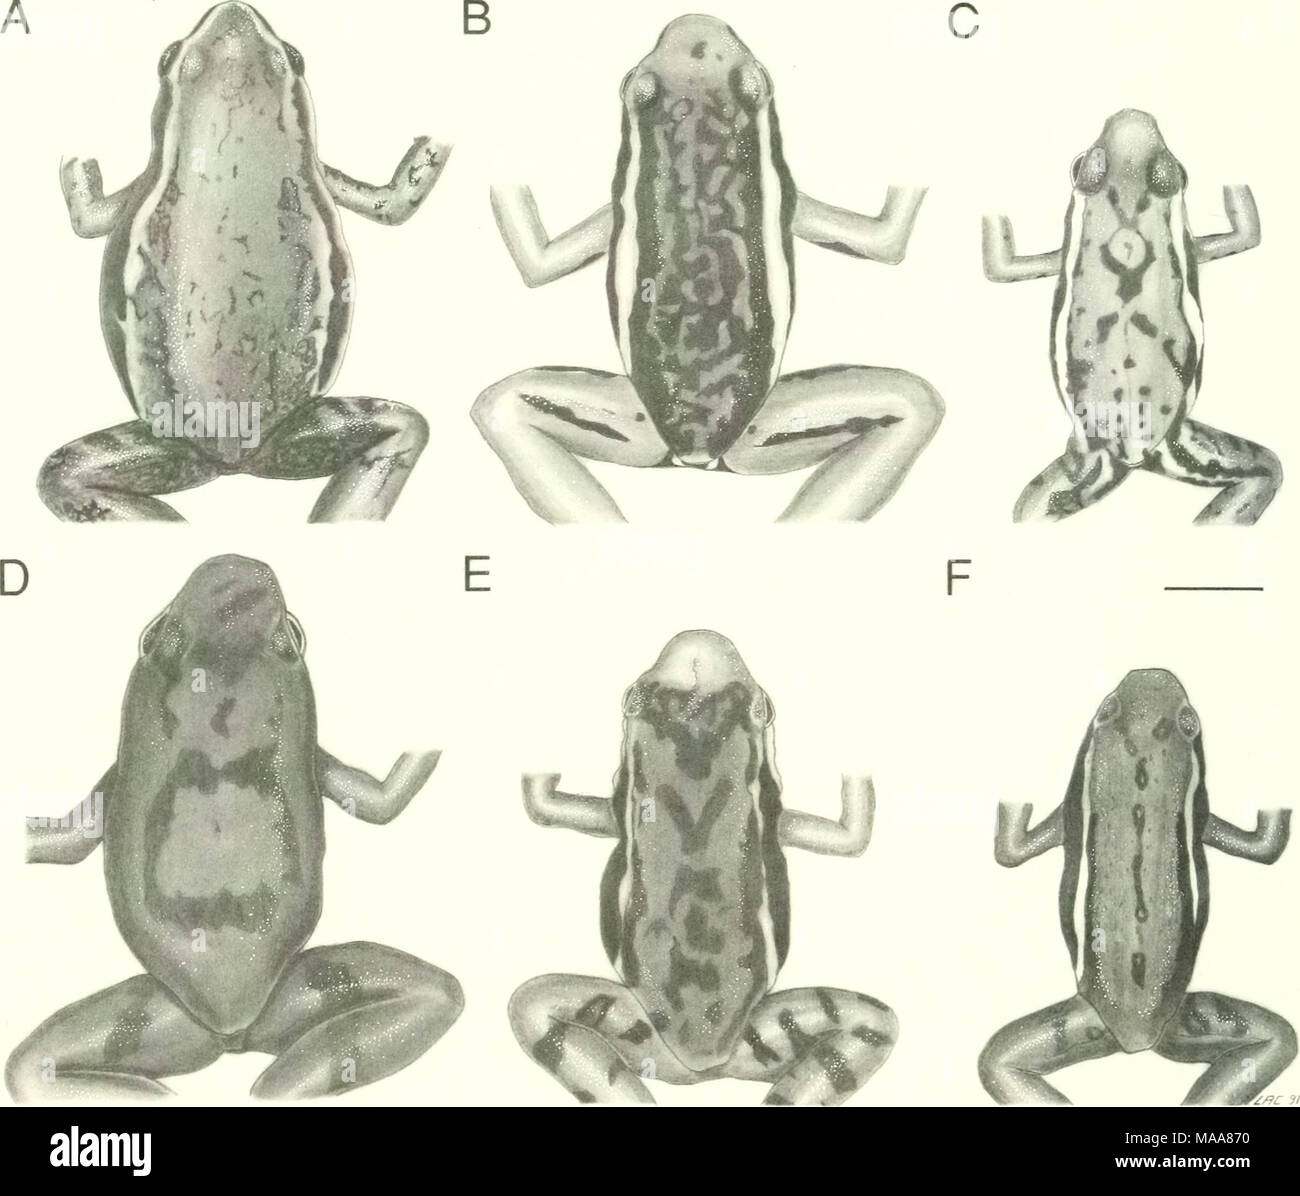 . Ecuadorian frogs of the genus Colostethus (Anura:Dendrobatidae) . Fig. 2. Dorsal color patterns of Colostethus. A. C. jacobuspetersi, QCAZ 1378. B. C. maquipucuna, KU 202882. C. C. machalilla, KU 132330. D. C. chocoensis, MNHG (GO 47). E. C. infraguttatus KU 142401. F. C. anthracinus, KU 120653. Lines equal 5 mm, except in A, in which it is 2 mm. developed in C. bocagei, C. elachyhistus, C. fuliginosus, C. talamancae, C. sauli, and C. shuar. In other species, it is weakly developed. A sigmoid or straight inner tarsal fold is present in most spe- cies; it extends from the distal half or two t Stock Photo